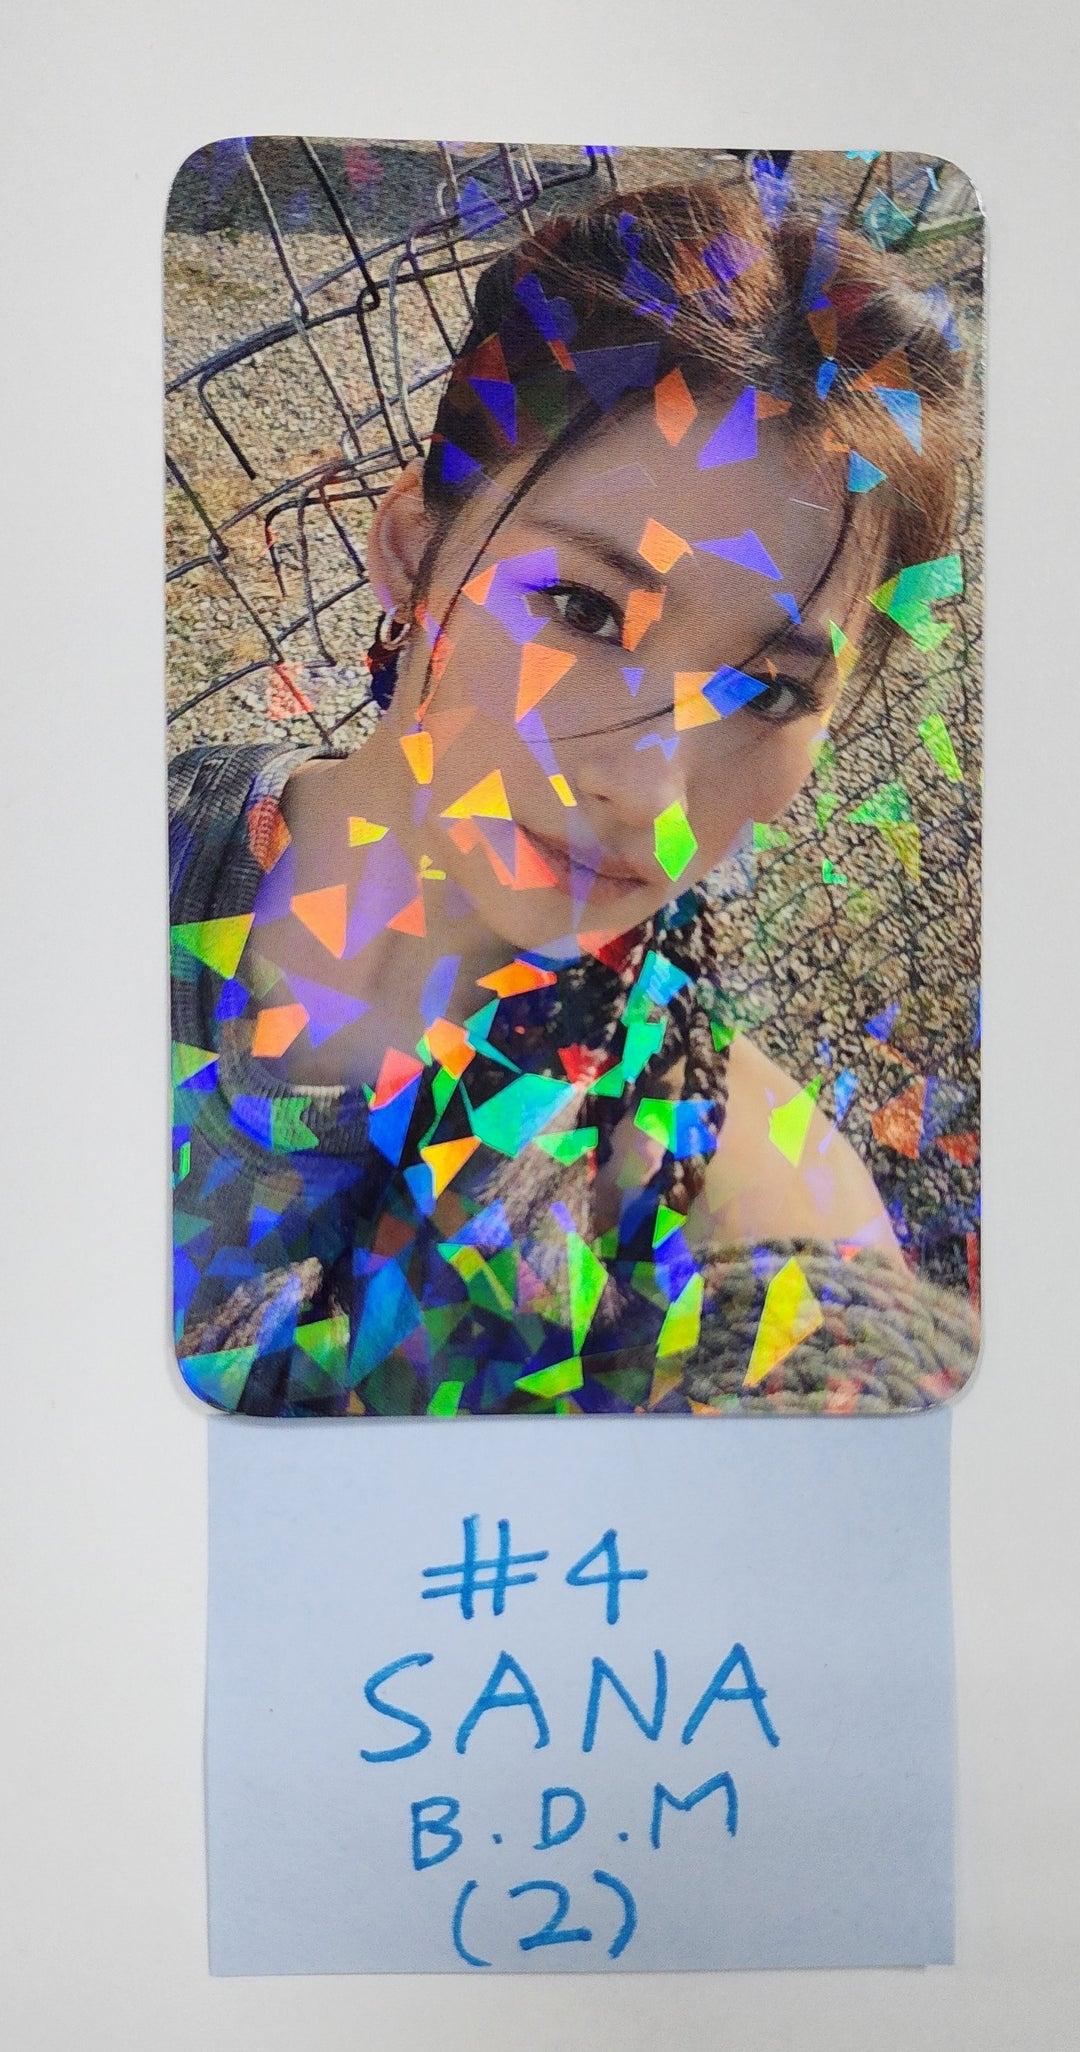 Twice "READY TO BE" - Blue Dream Media Pre-Order Benefit Hologram Photocard